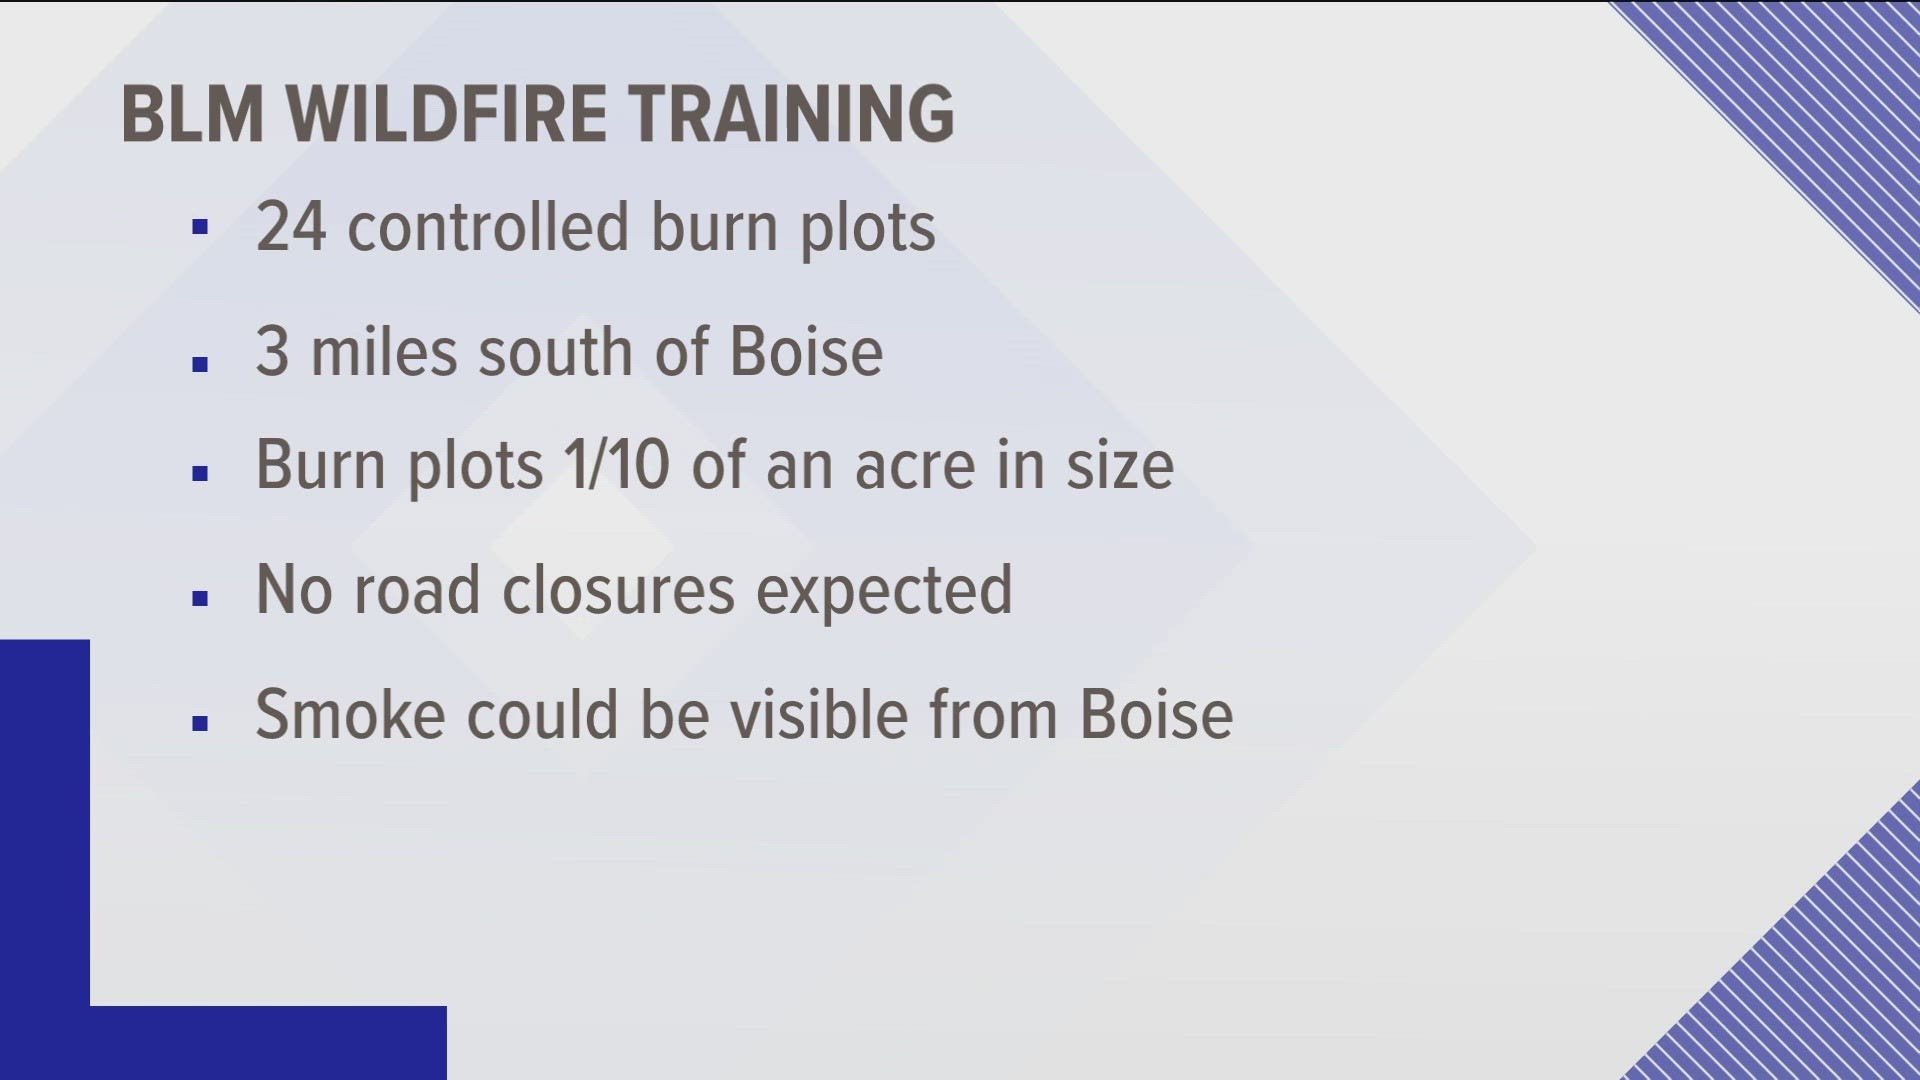 The department will ignite "a series of small, controlled burns," three miles south of Boise on Monday, May 22.